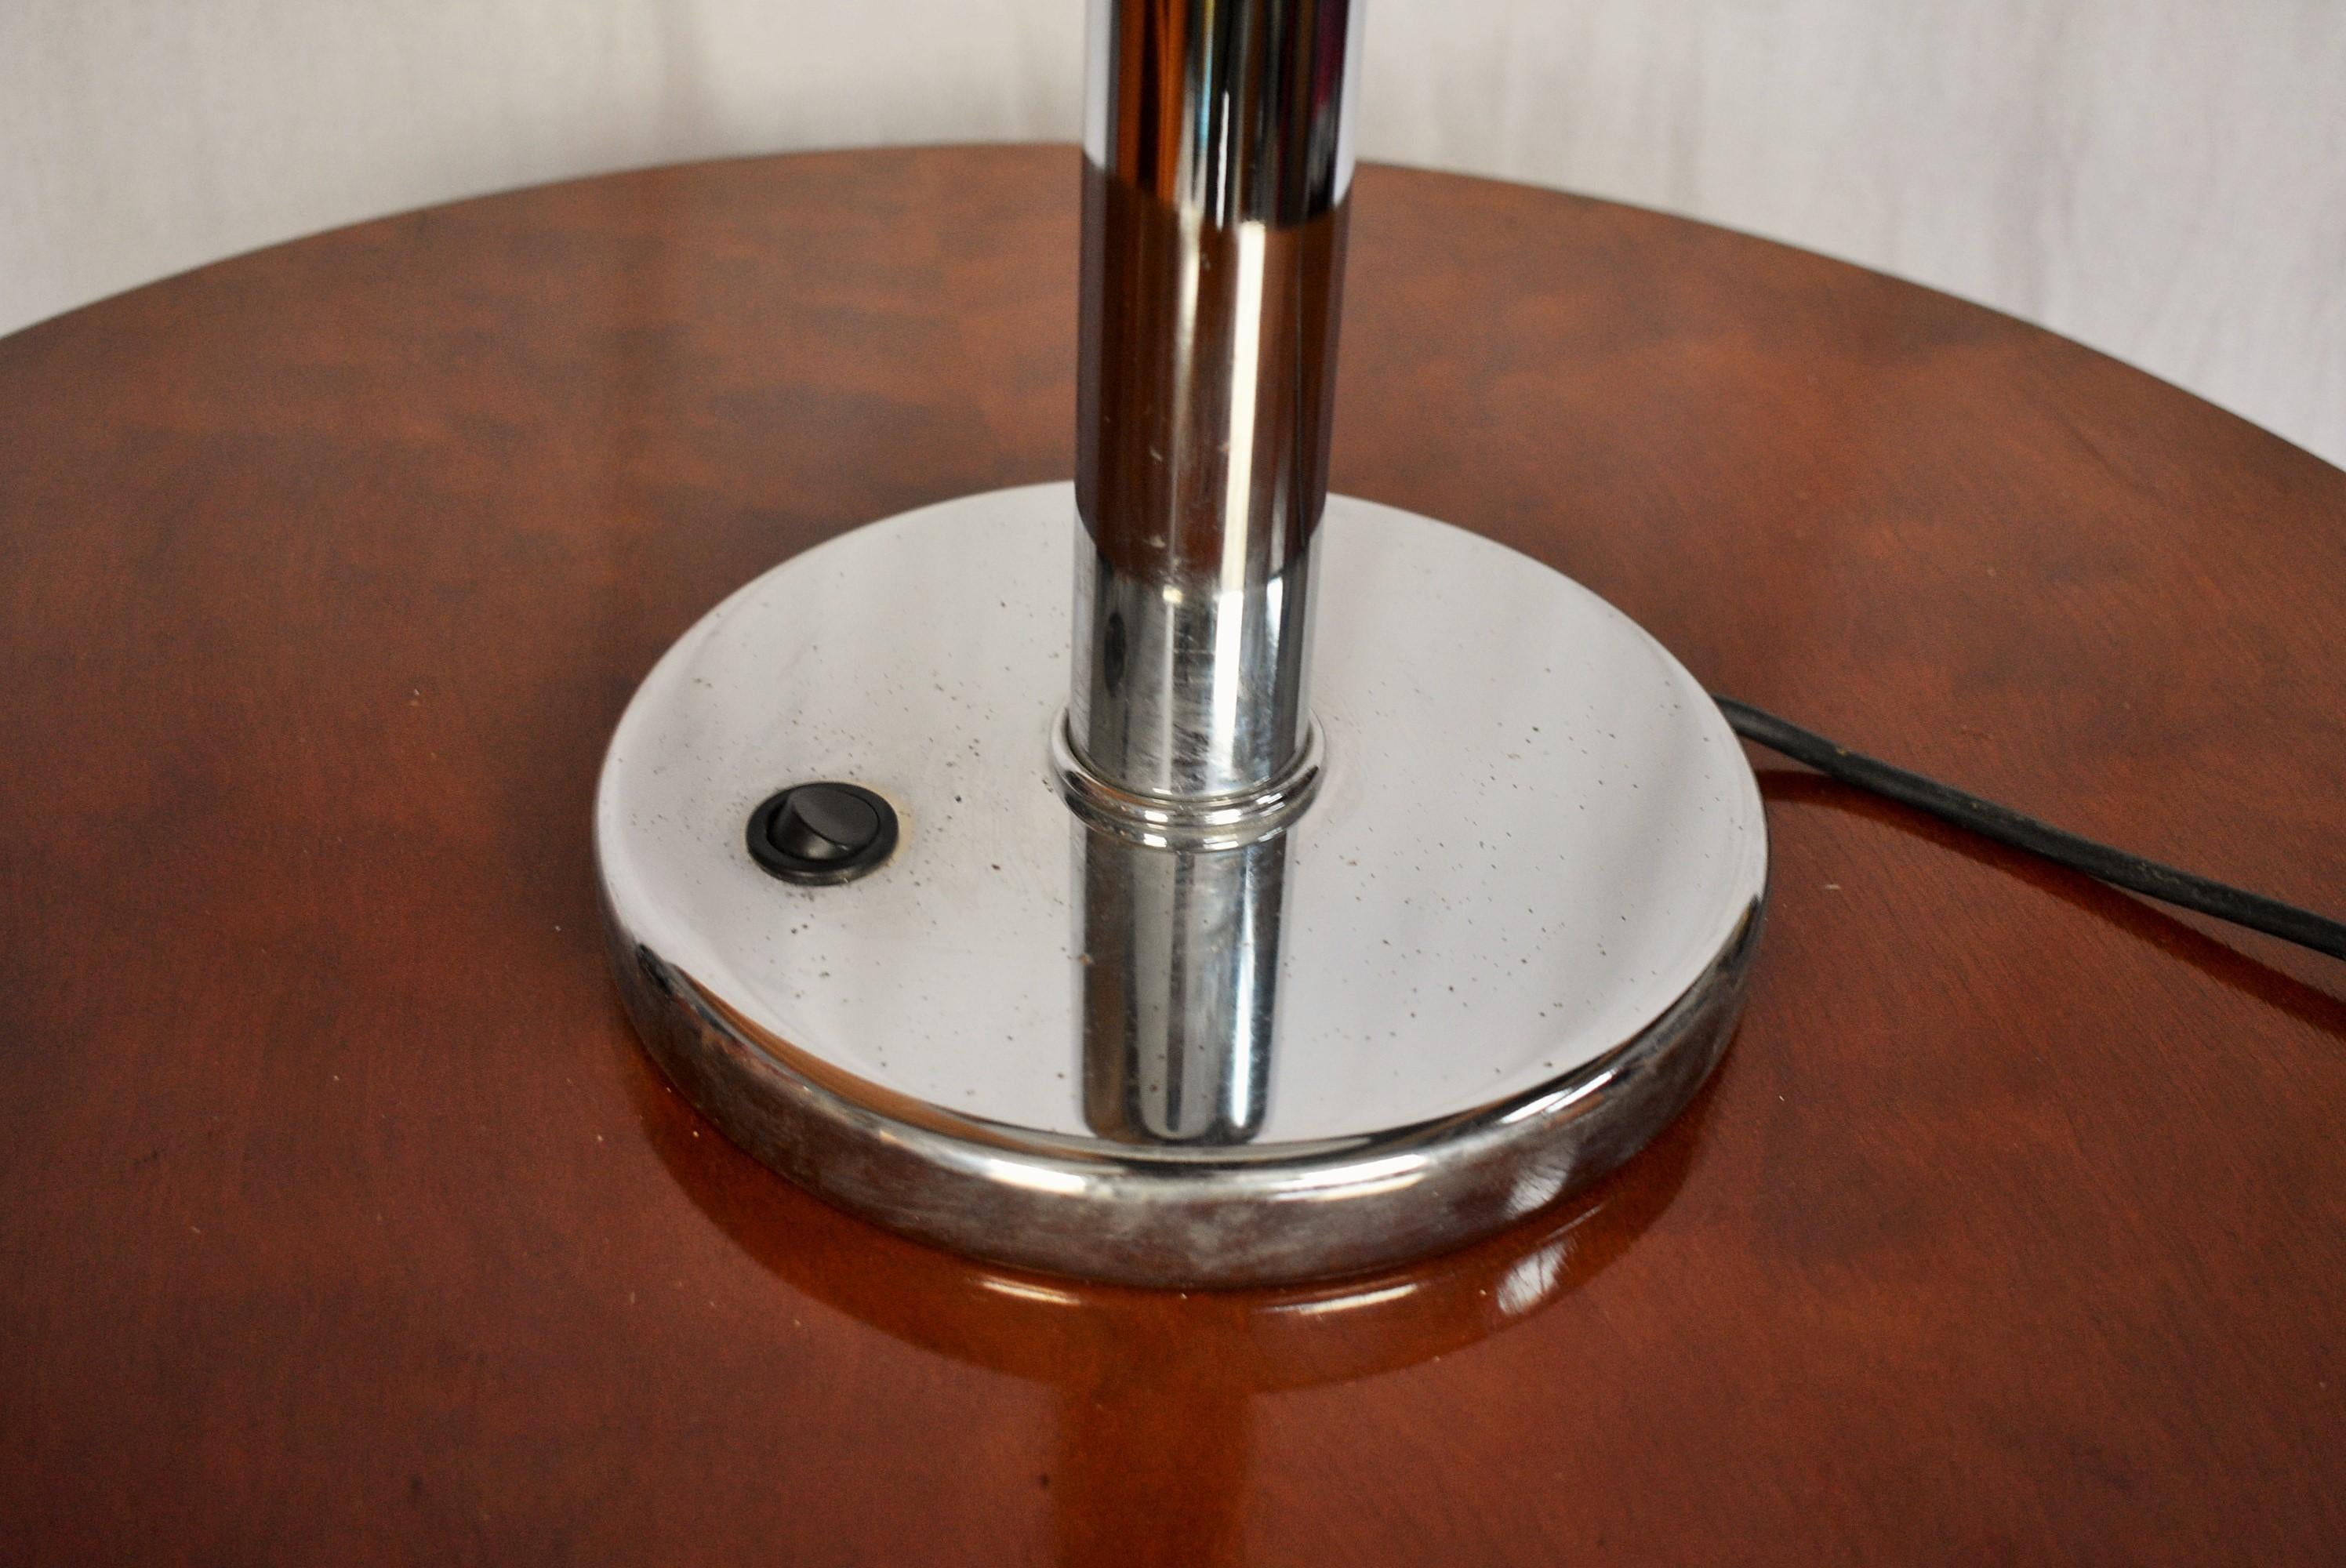 Czech Art Deco or Functionalist Nickel-Plated Table Lamp, 1920s For Sale